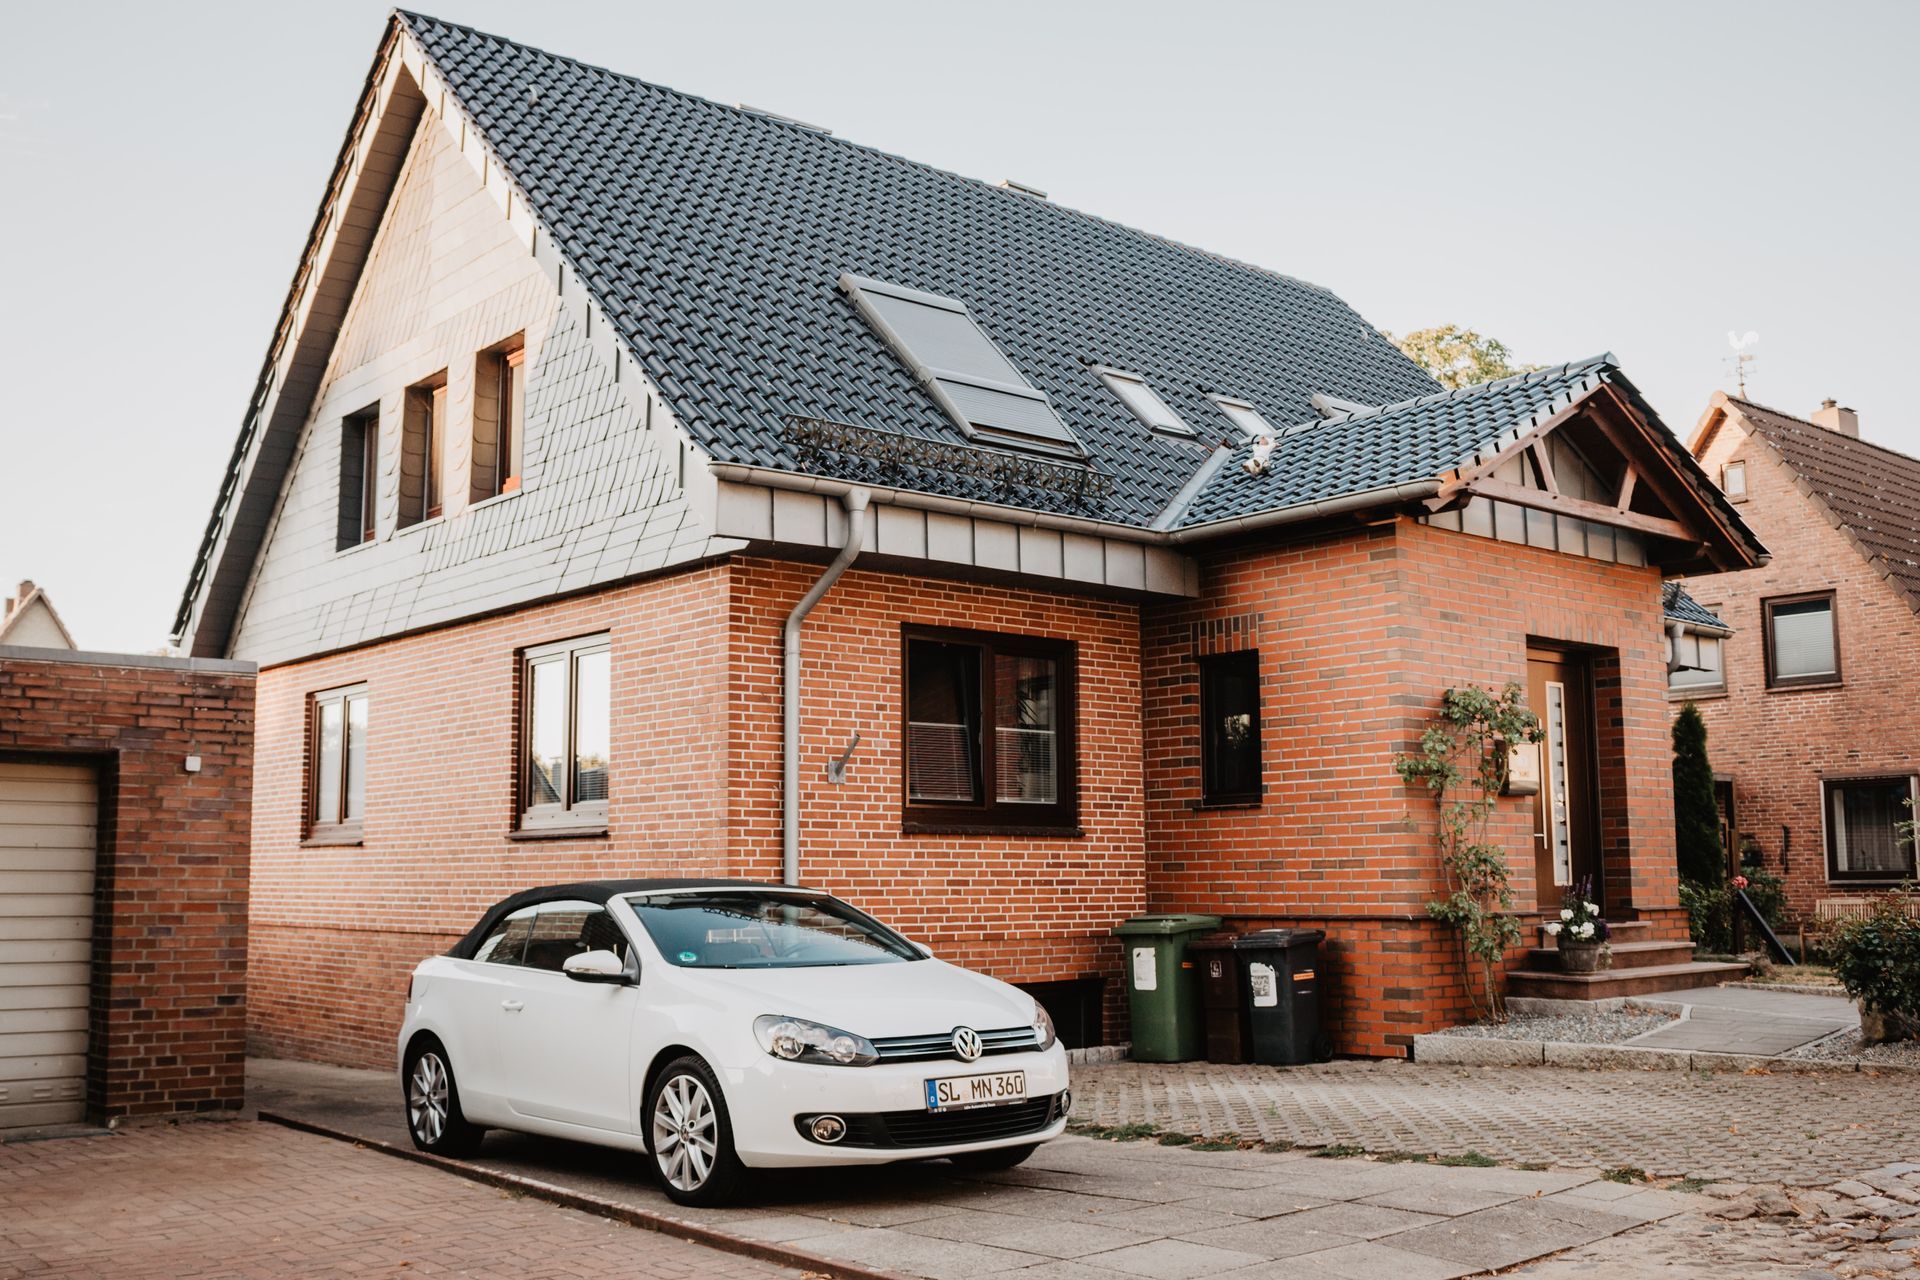 A white car is parked in front of a brick house.